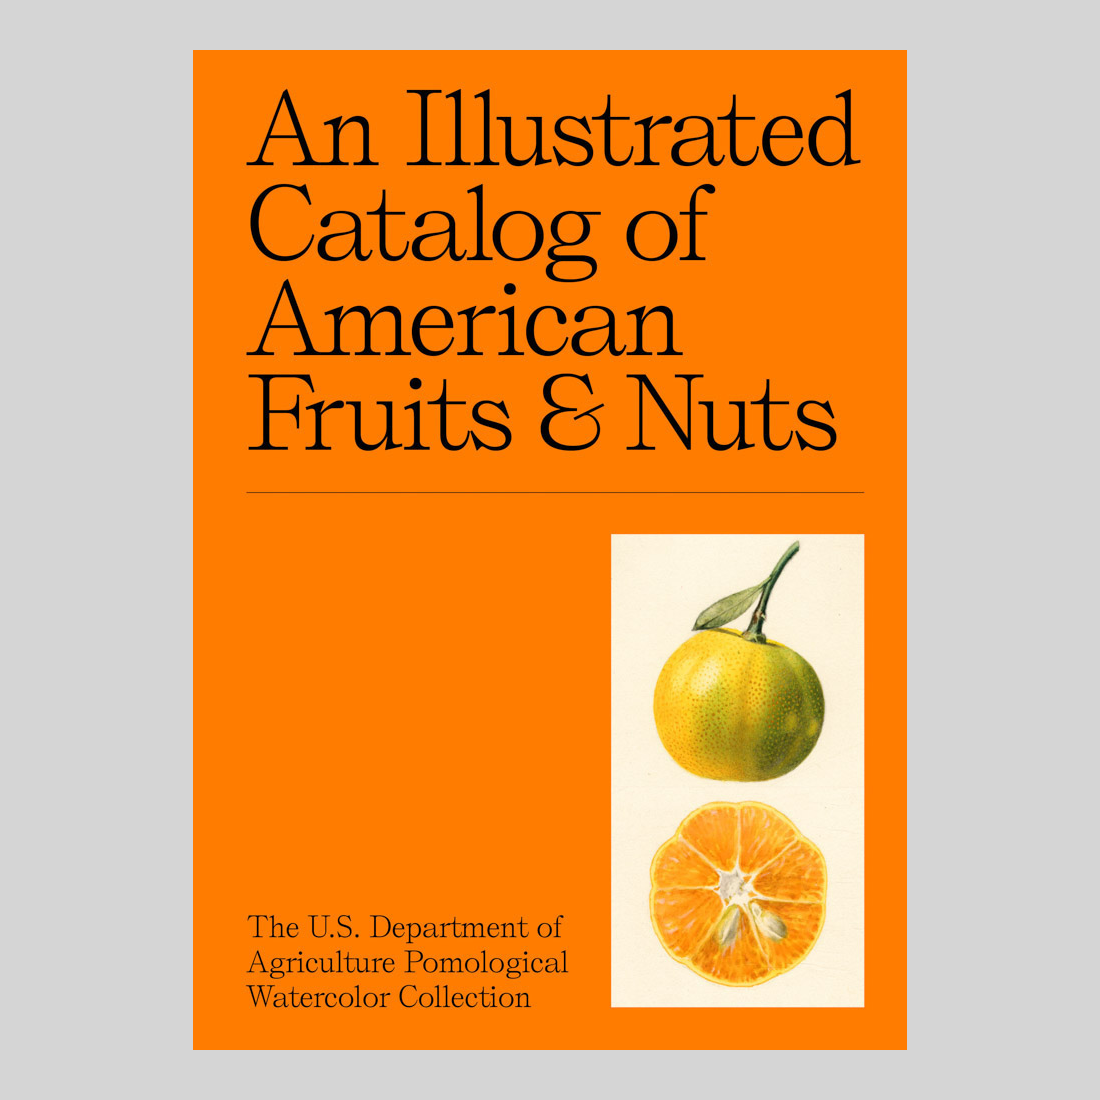 An Illustrated Catalog of American Fruits & Nuts: The U.S. Department of Agriculture Pomological Wat